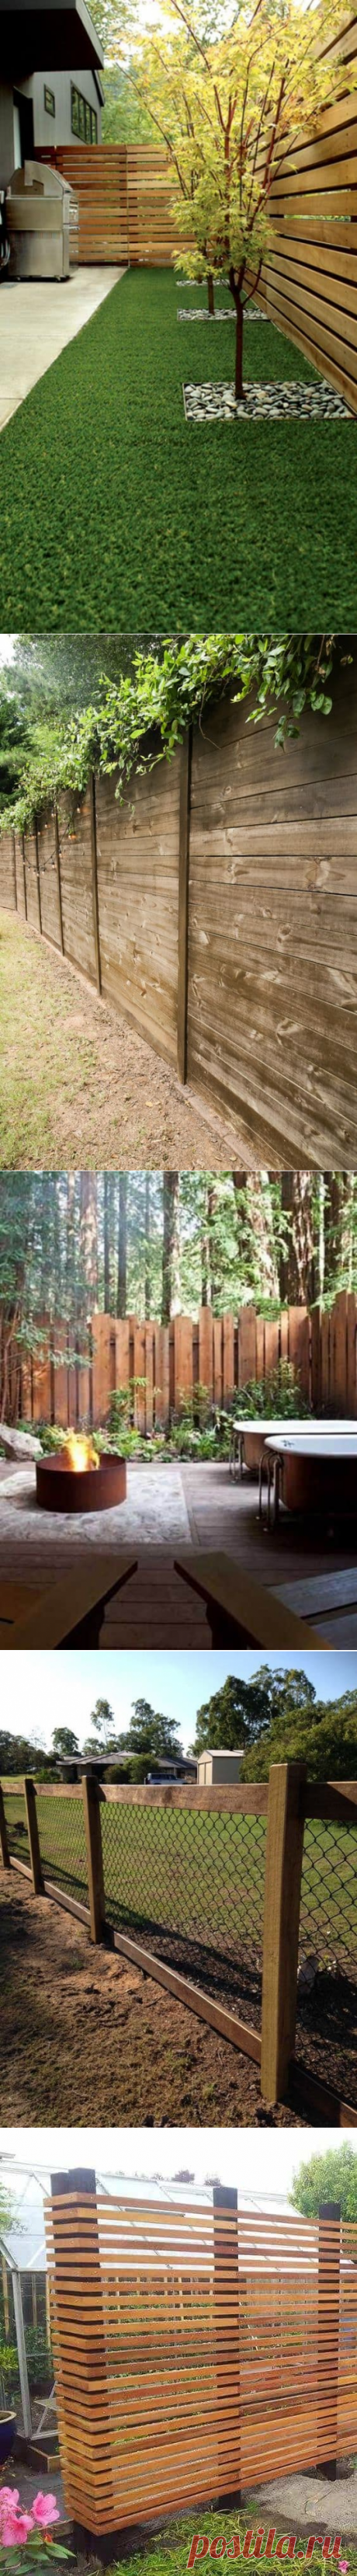 30 Wood Fence Ideas For You In 2019 - a nest with a yard